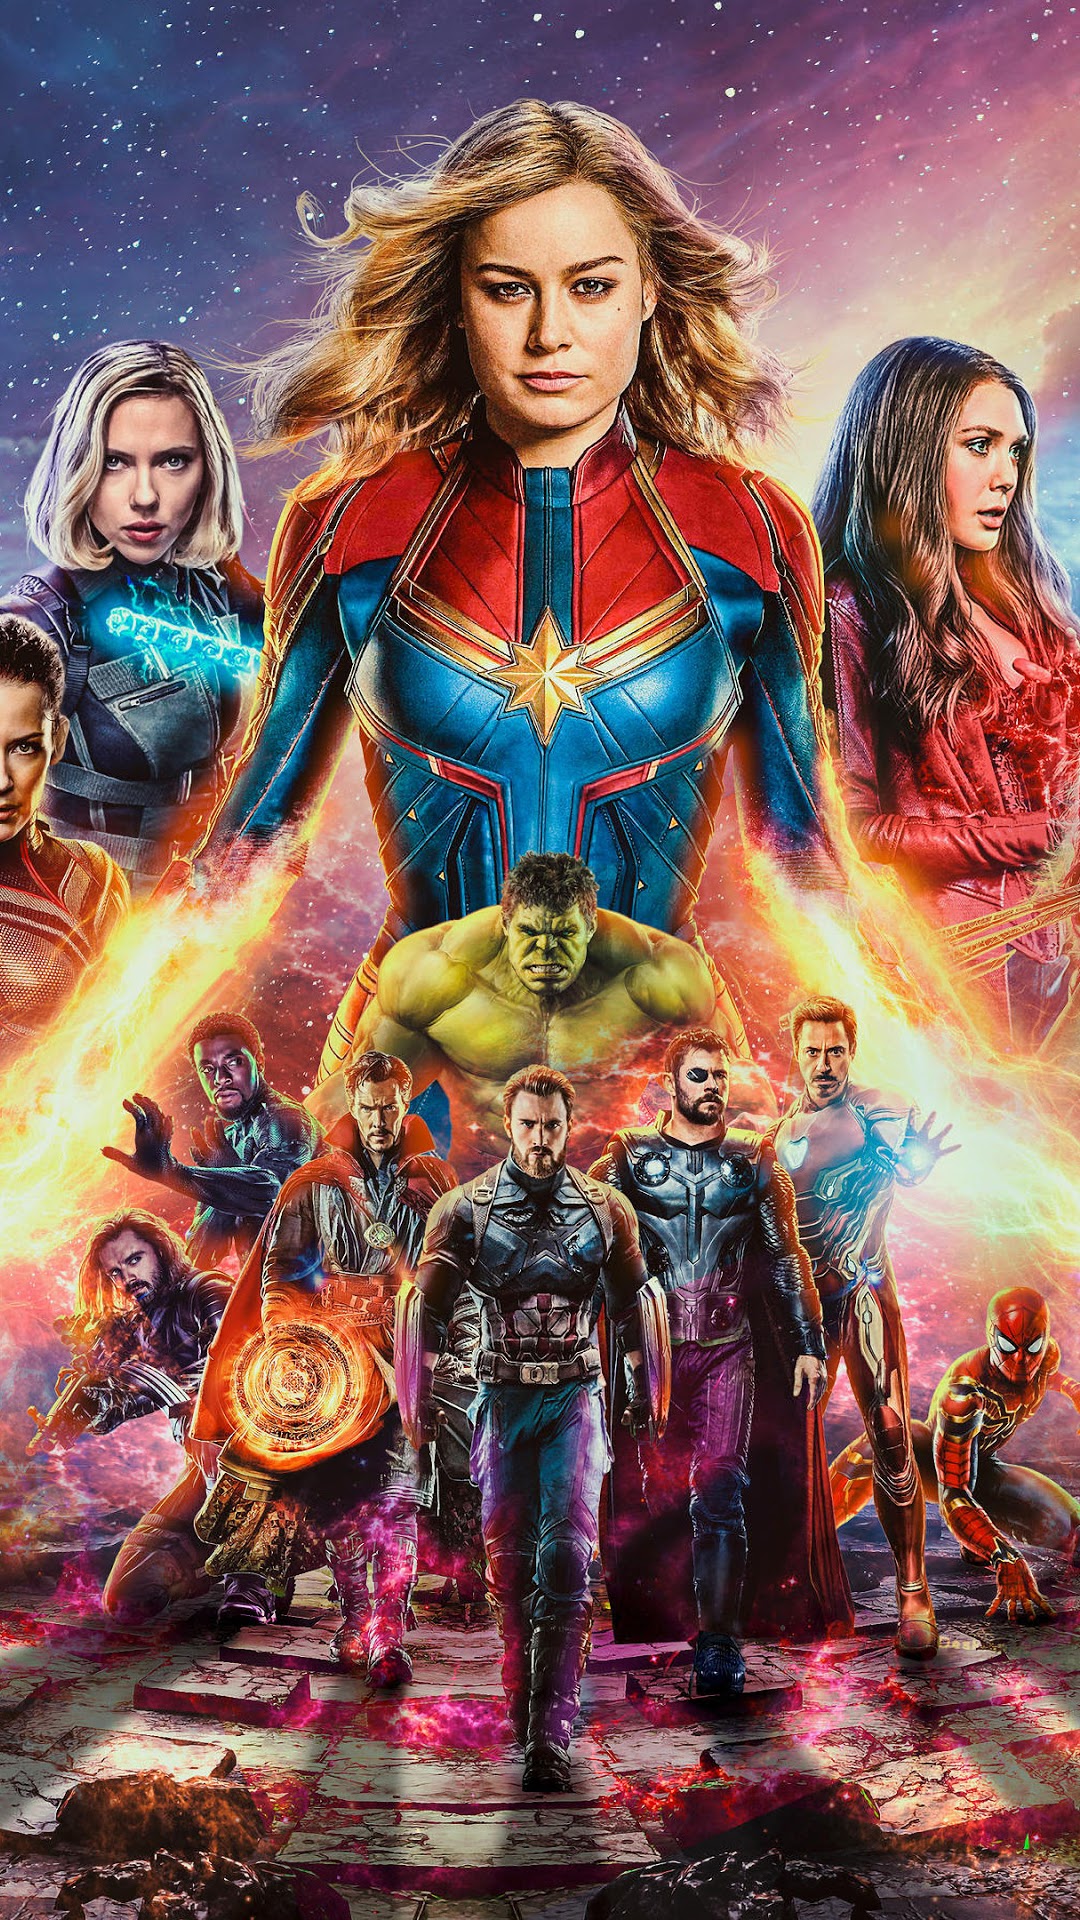 Avengers: Endgame, Captain Marvel, Cast, Characters phone HD Wallpaper, Image, Background, Photo and Picture HD Wallpaper